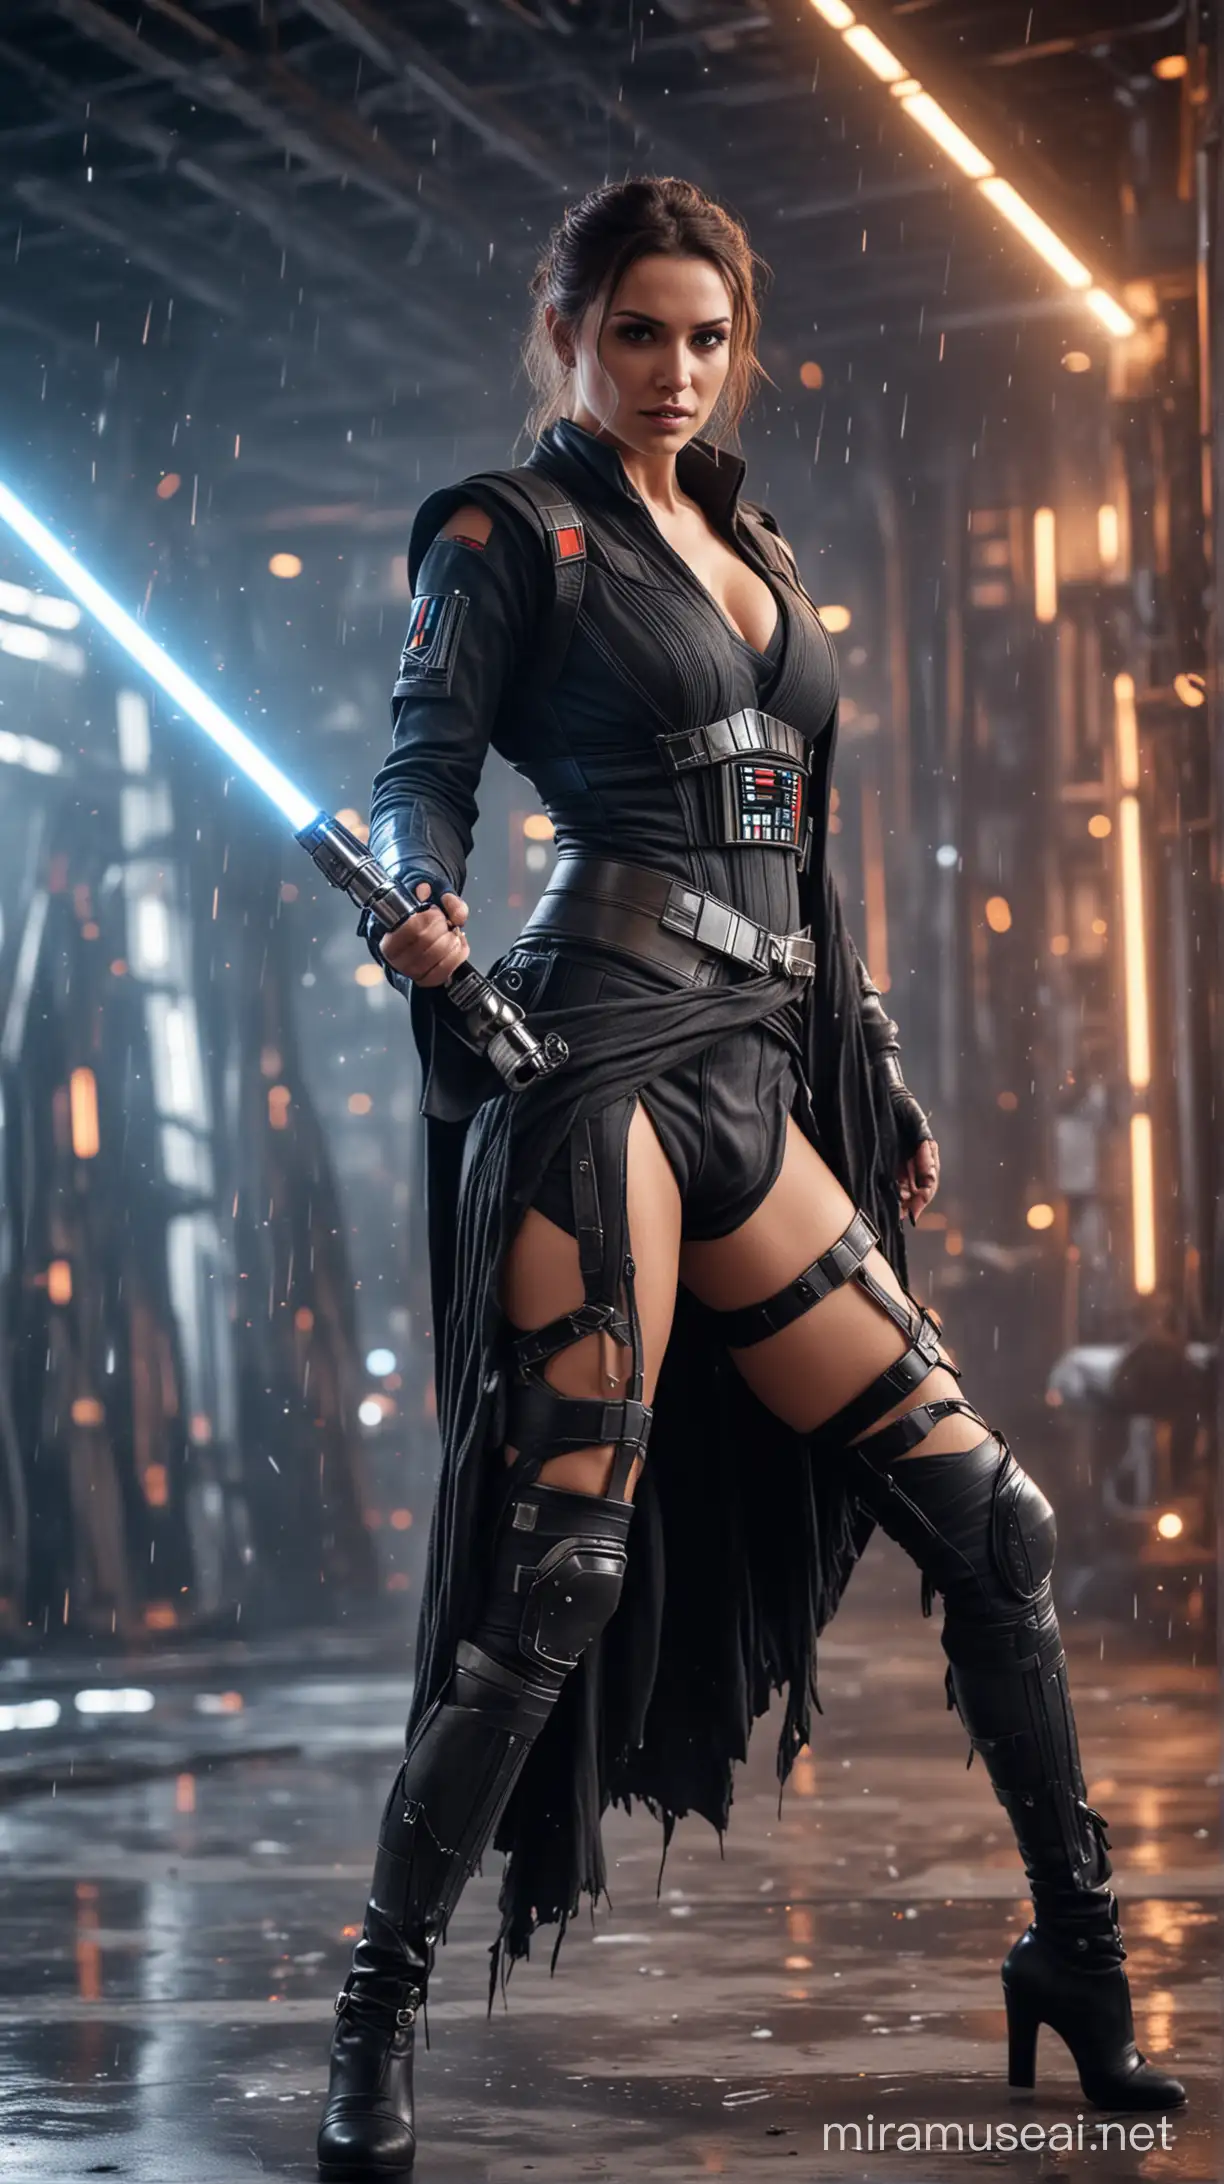 full body portrait (show head to feet)of a busty woman in ripped sith clothes swinging a lightsaber on a spacestation after a hard fight, action scene, blurred background, bokeh, sparks